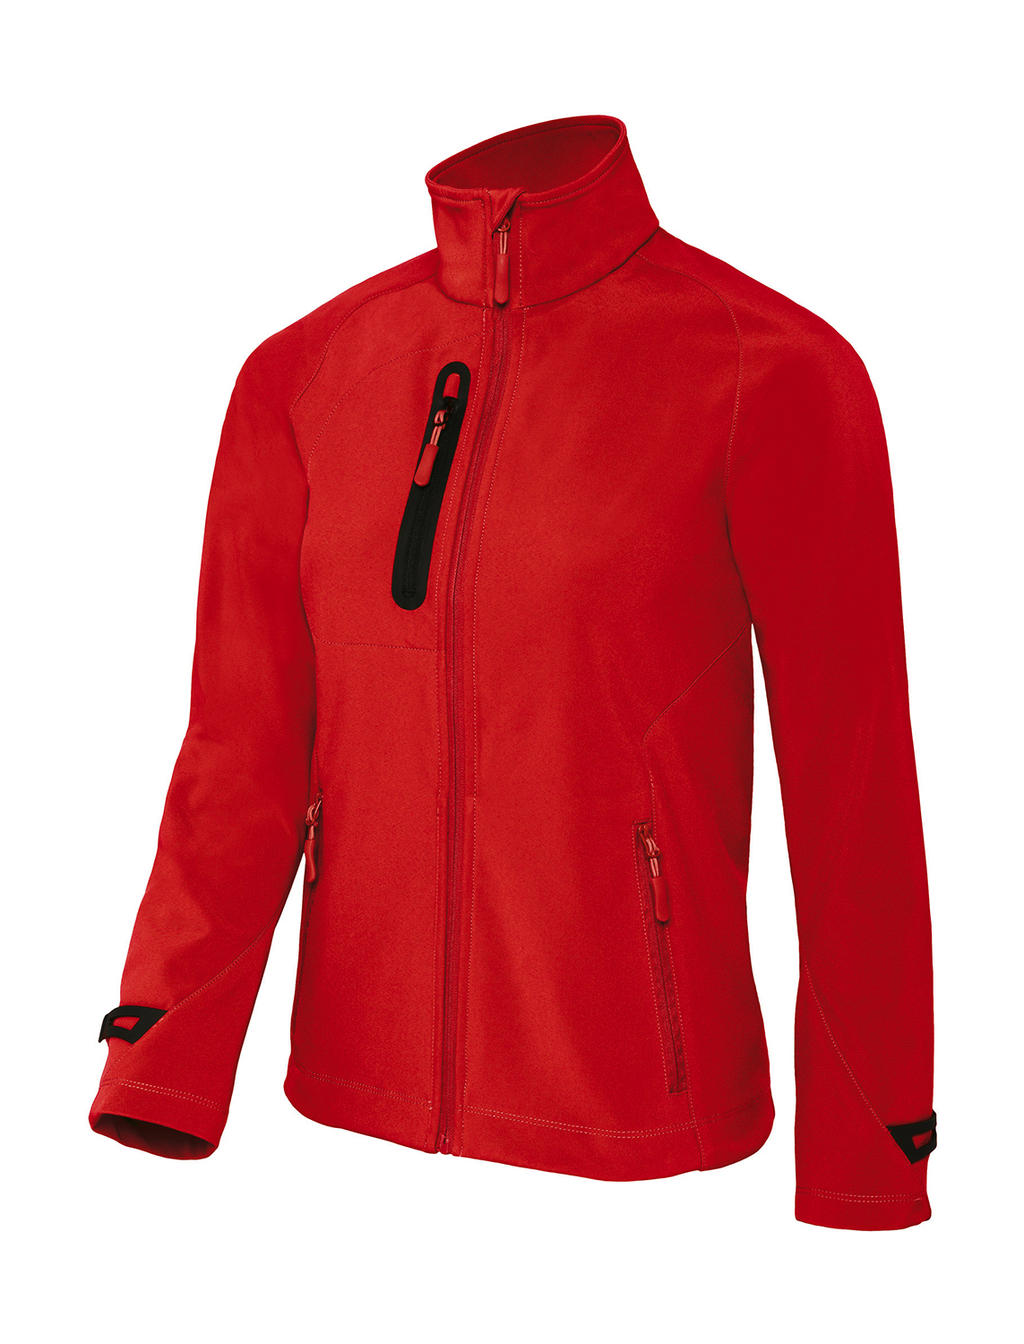  X-Lite Softshell/women Jacket in Farbe Deep Red